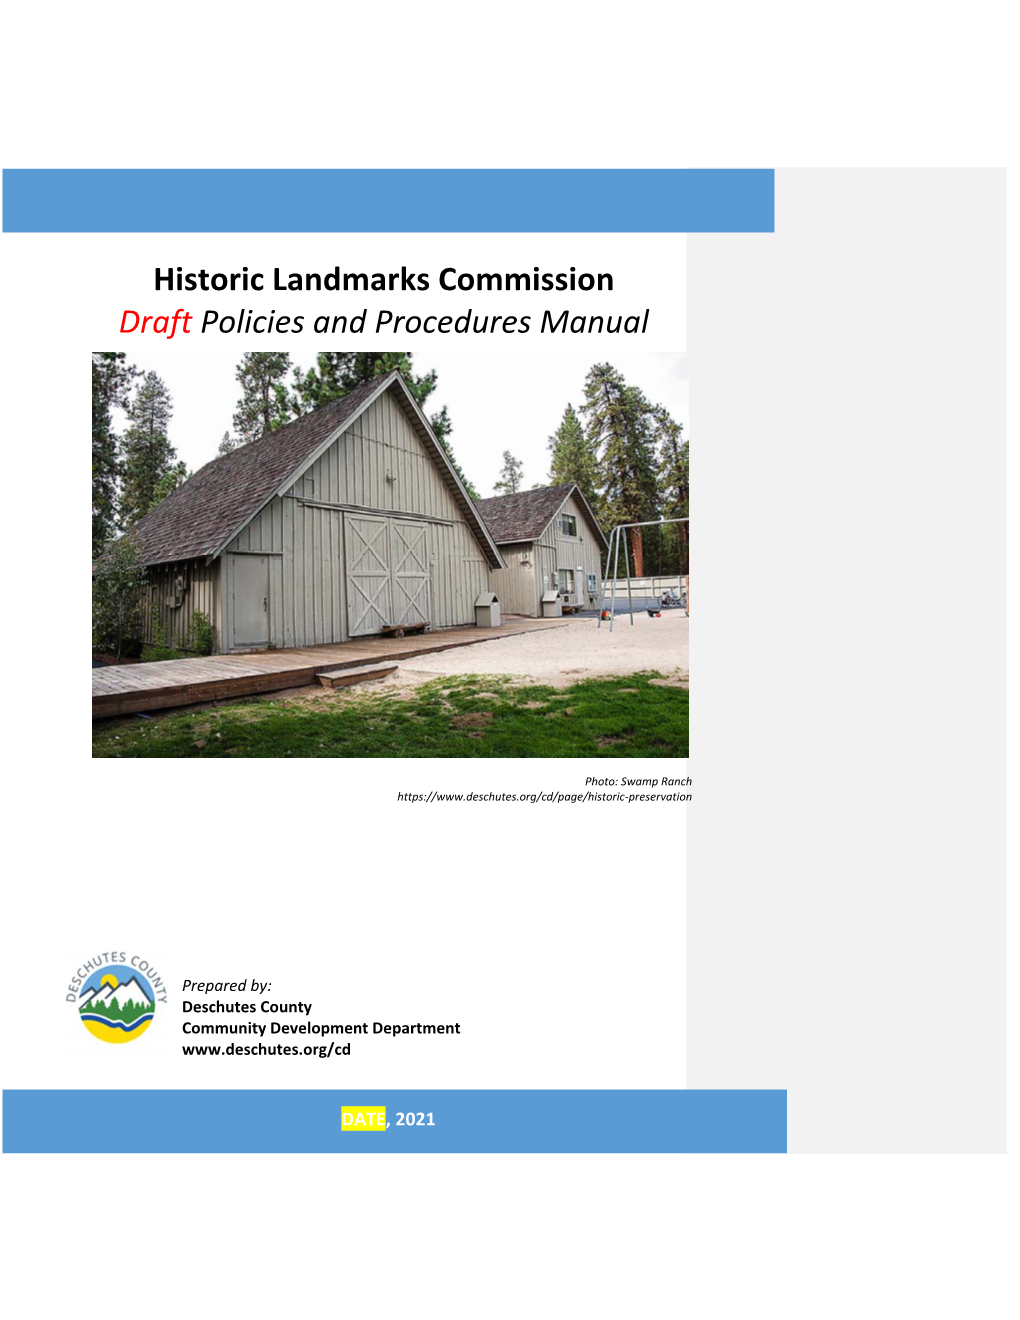 Historic Landmarks Commission Draft Policies and Procedures Manual